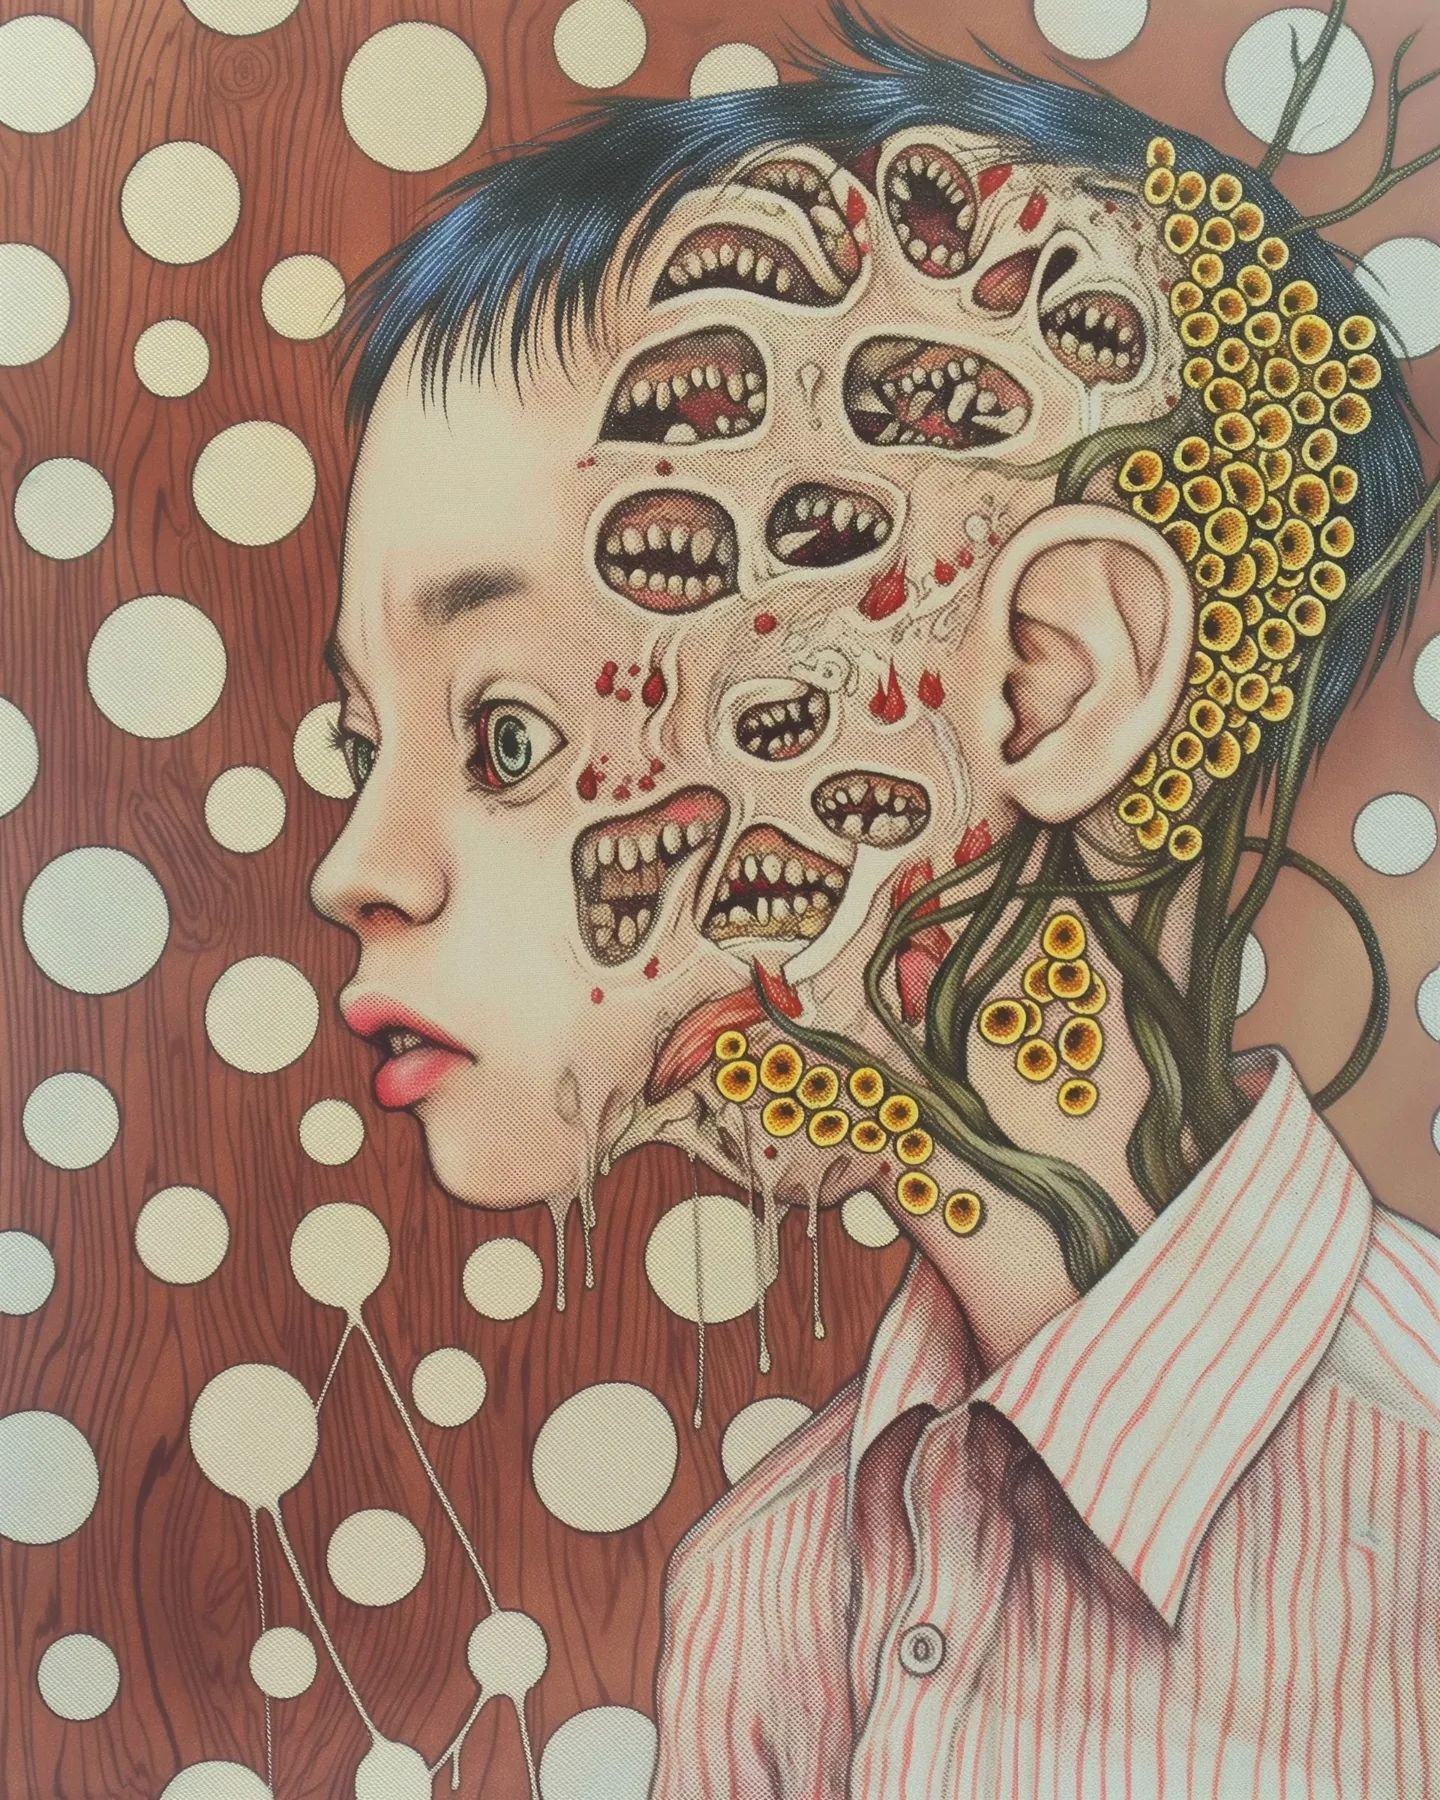 Specimen. 

Inspired by the works of Shintaro Kago.

#ai #aigeneratedart #aiartcommunity #aiart #midjourneyai #midjourney #midjourneyart #macabre #macabreart #horror #horrorart #goodgrief